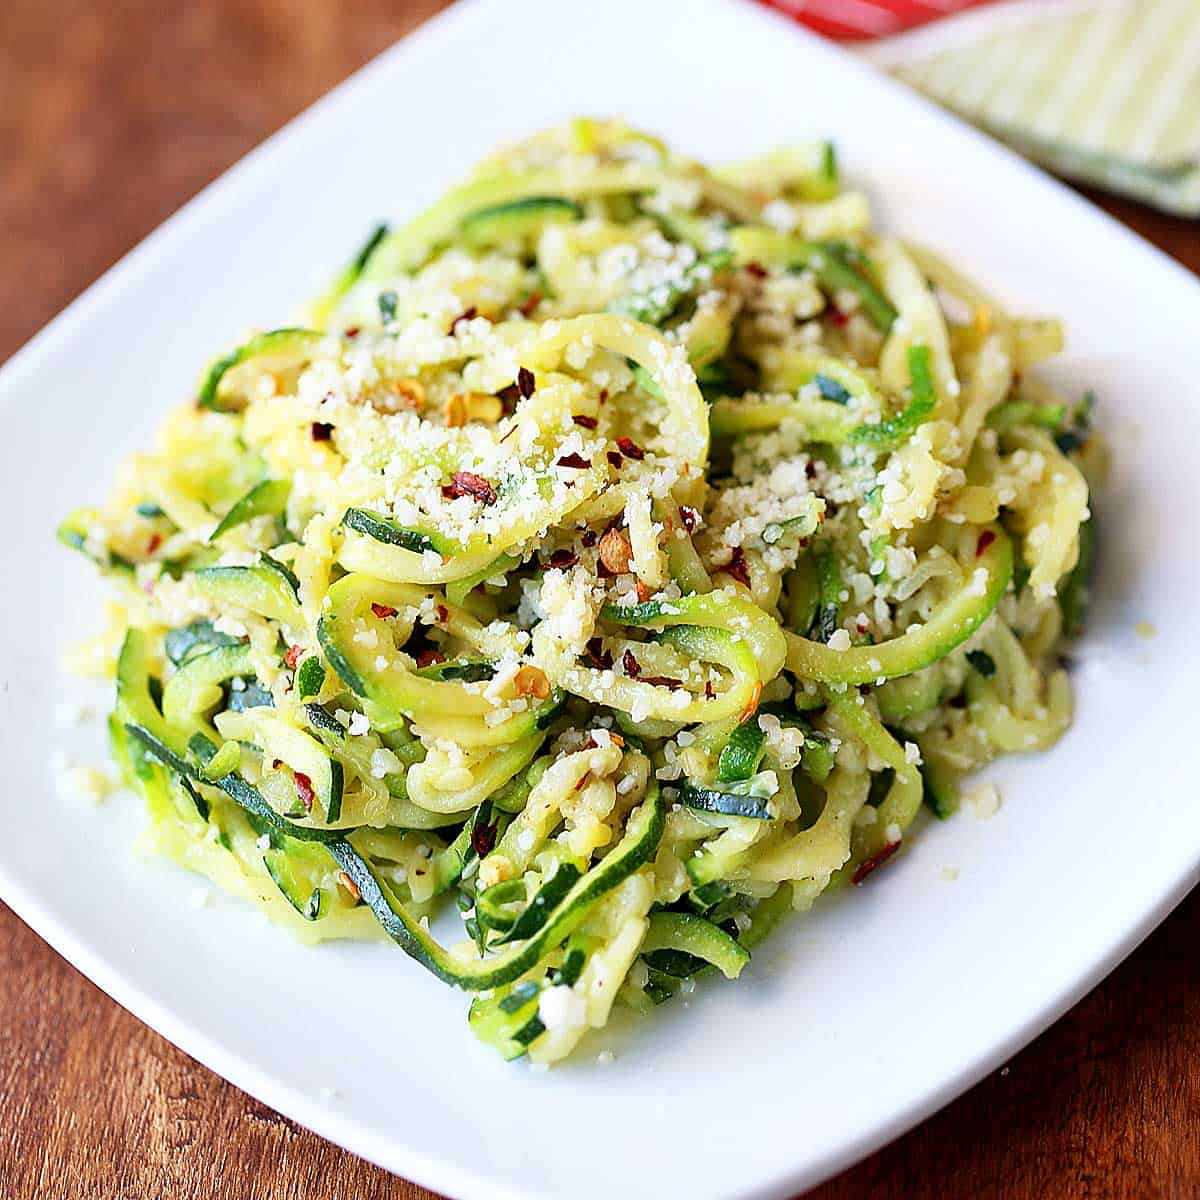 HOW TO MAKE ZUCCHINI NOODLES